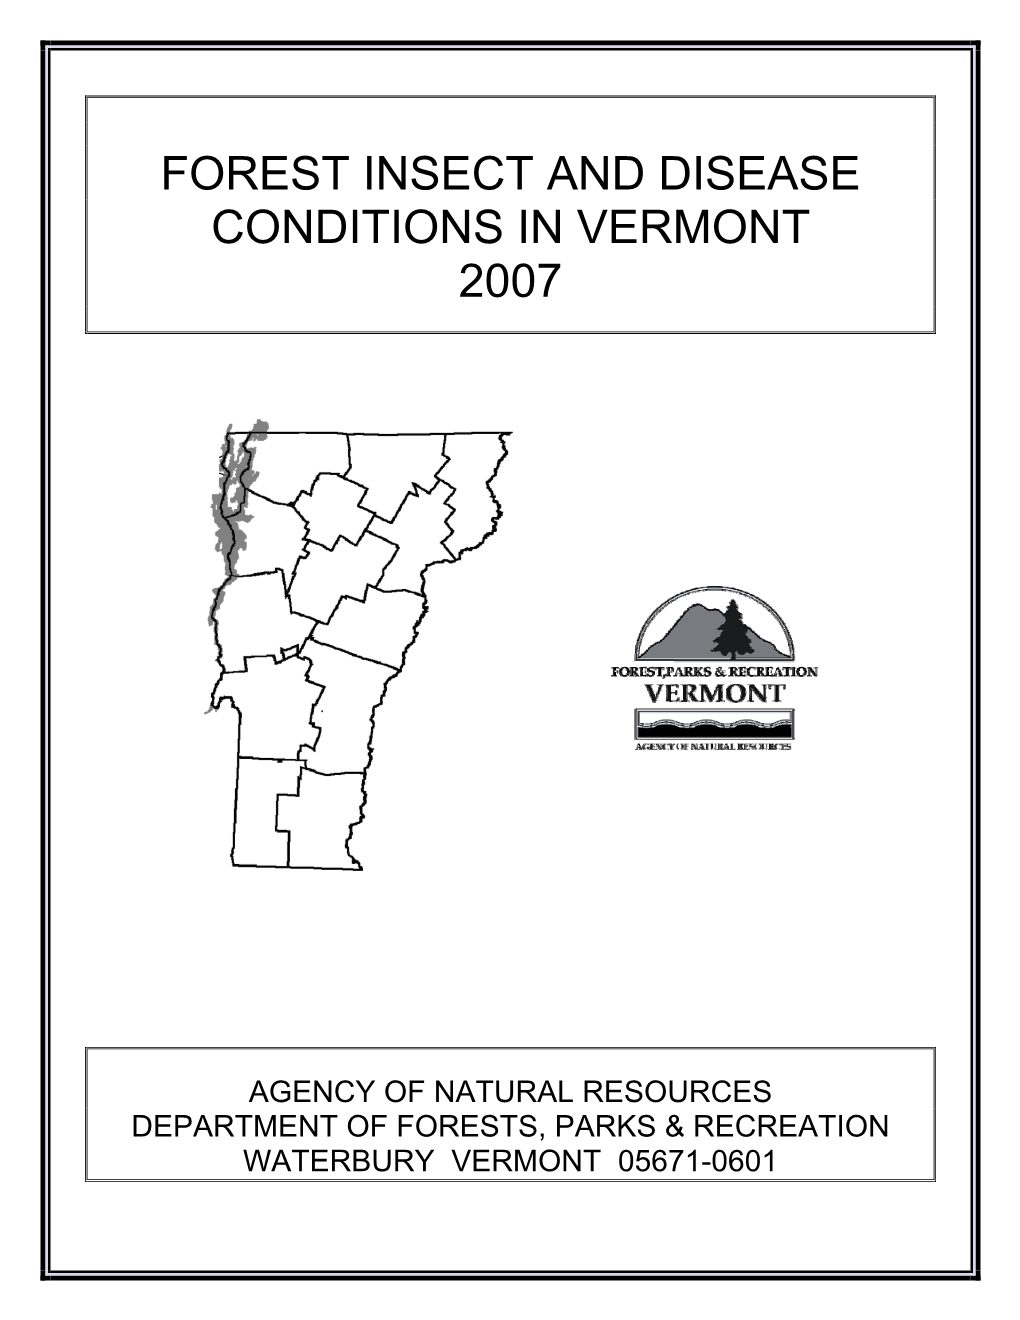 Forest Insect and Disease Conditions in Vermont 2007